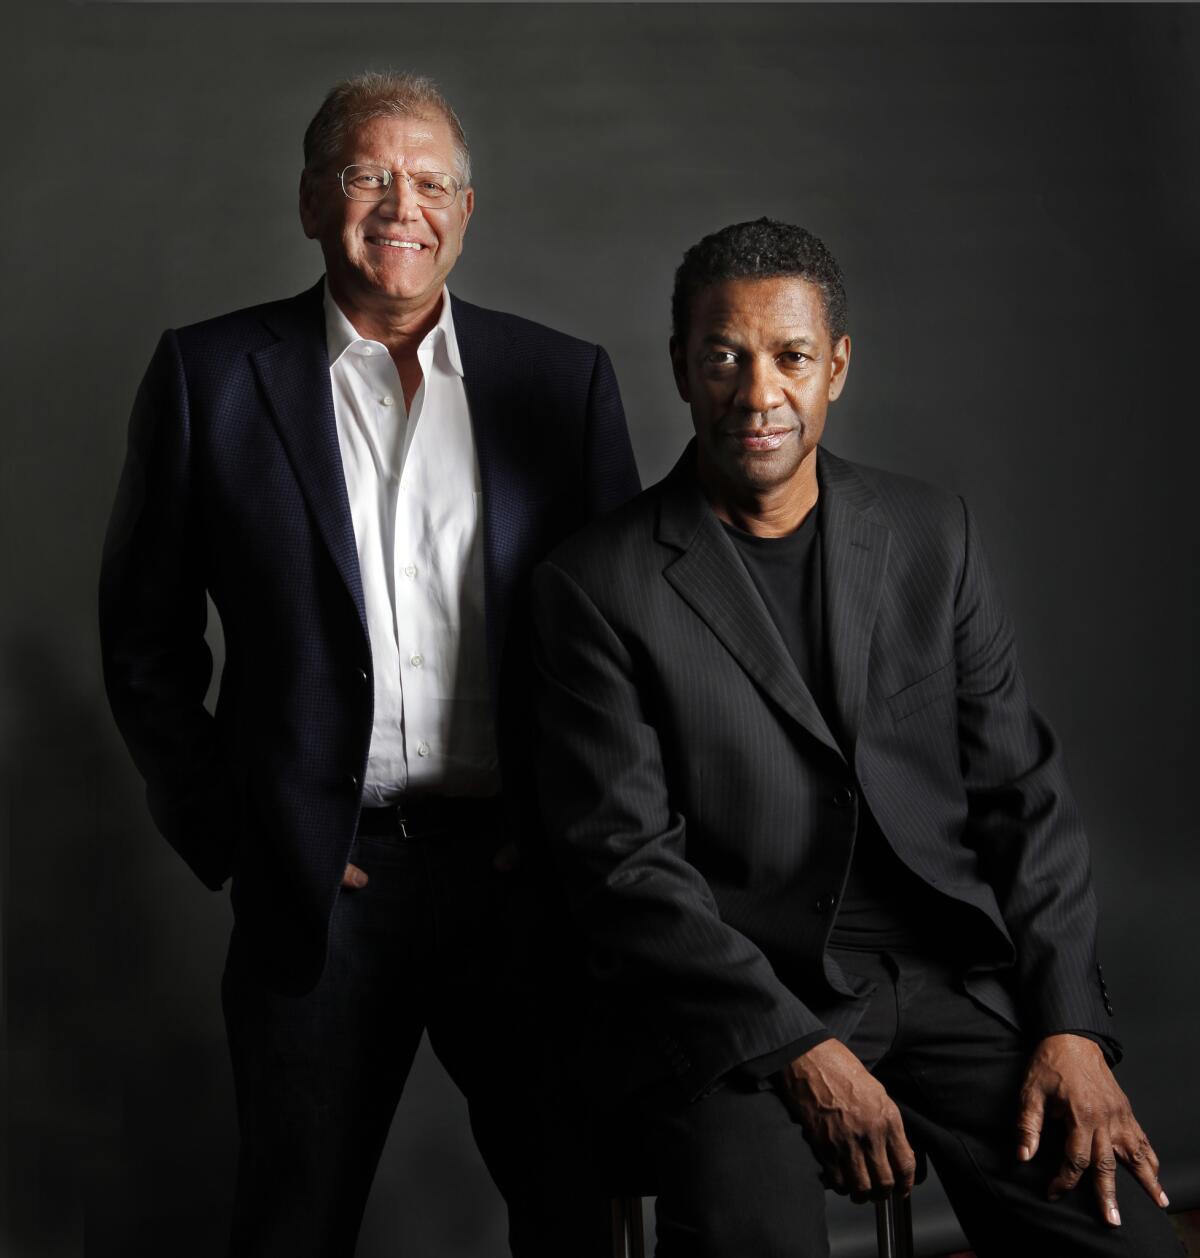 Director Robert Zemeckis and Denzel Washington worked together on the new movie "Flight."